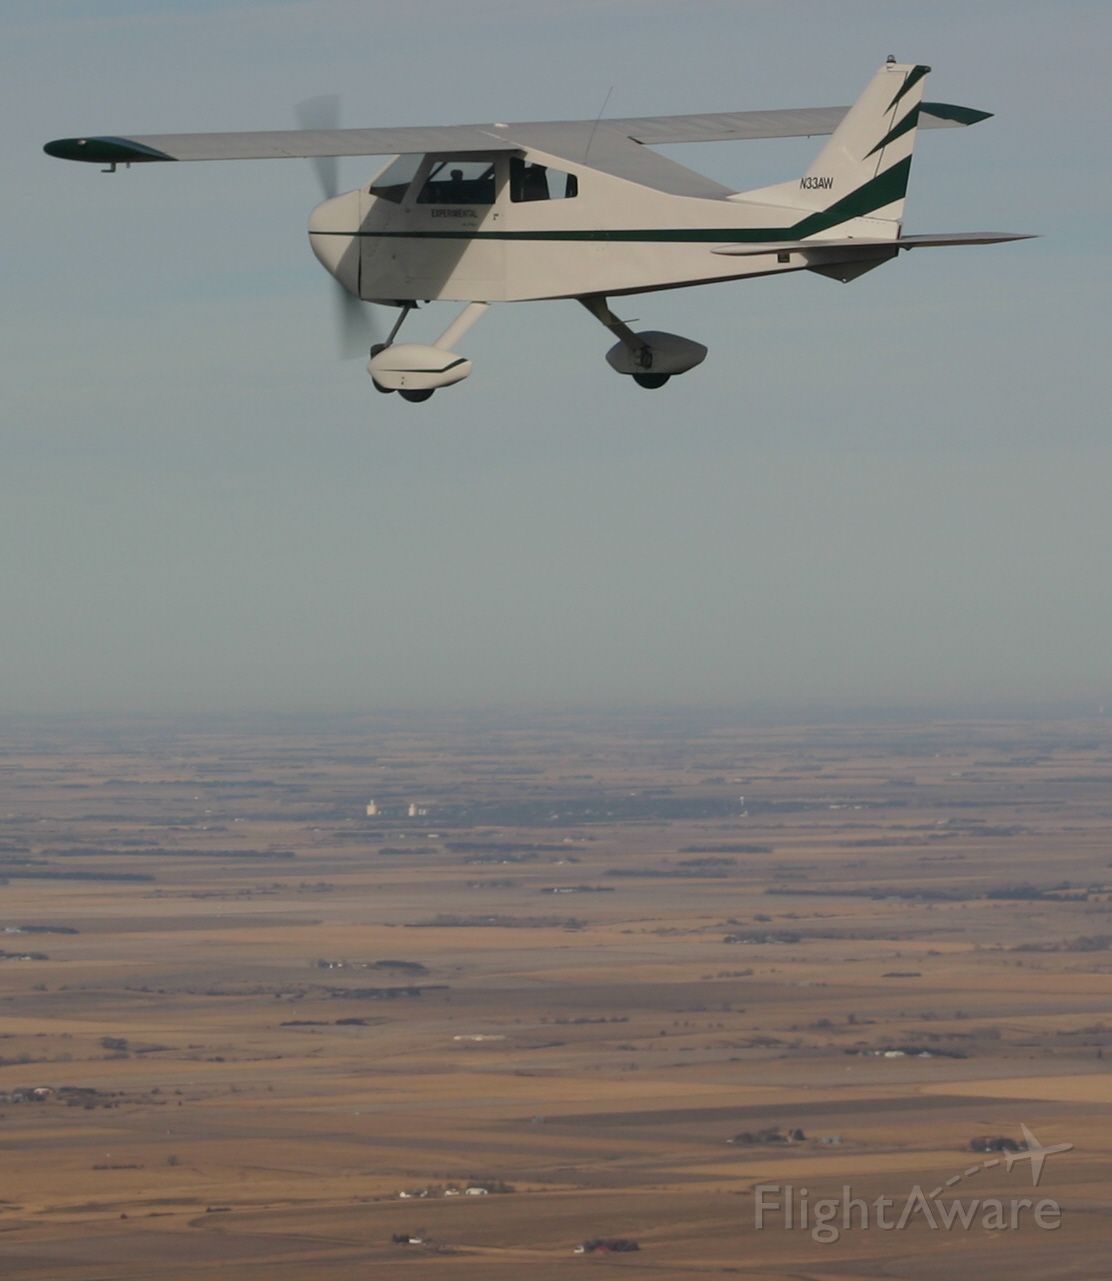 TENNESSEE VALLEY BD-4 (N33AW) - Flight over Eastern Nebraskabr /Flight over Eastern Nebraska